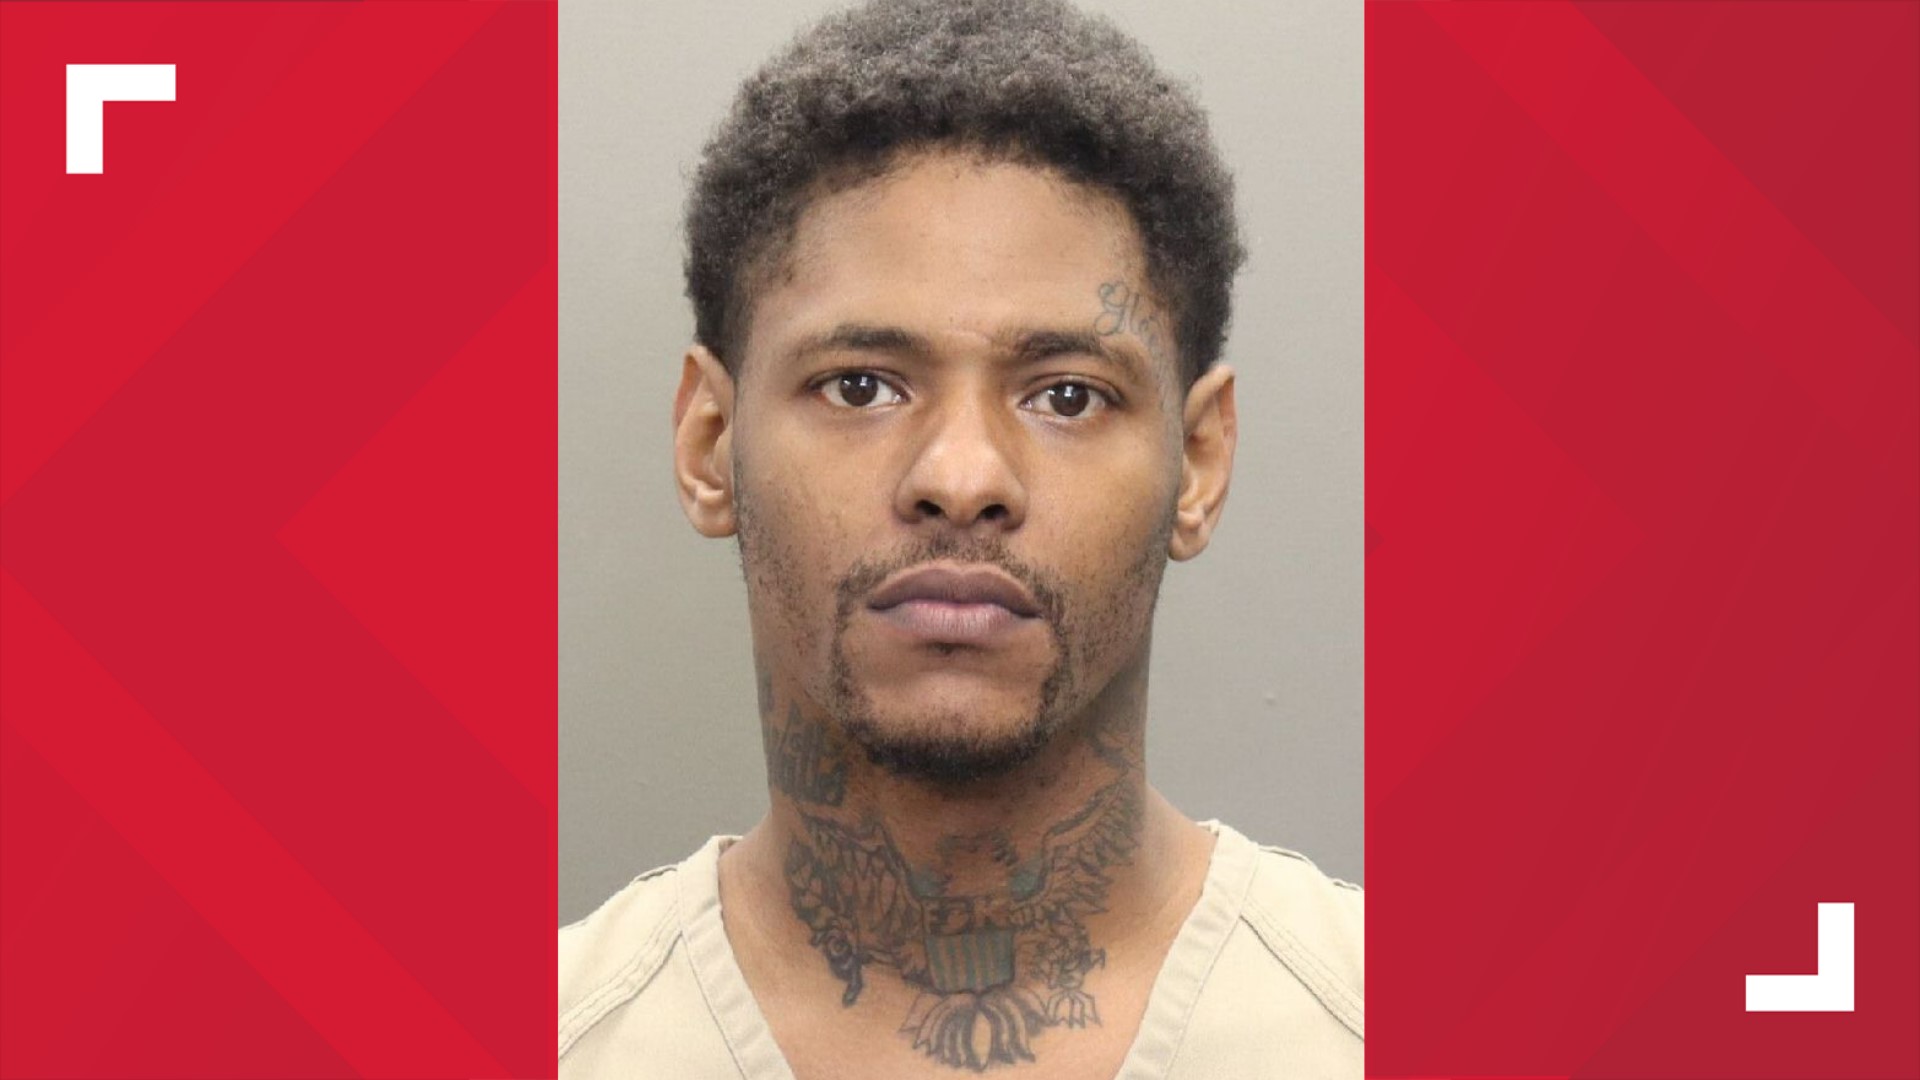 The murder charge against 32-year-old Jermaine Johnson stems from the shooting death of 31-year-old Anthony Elmore.